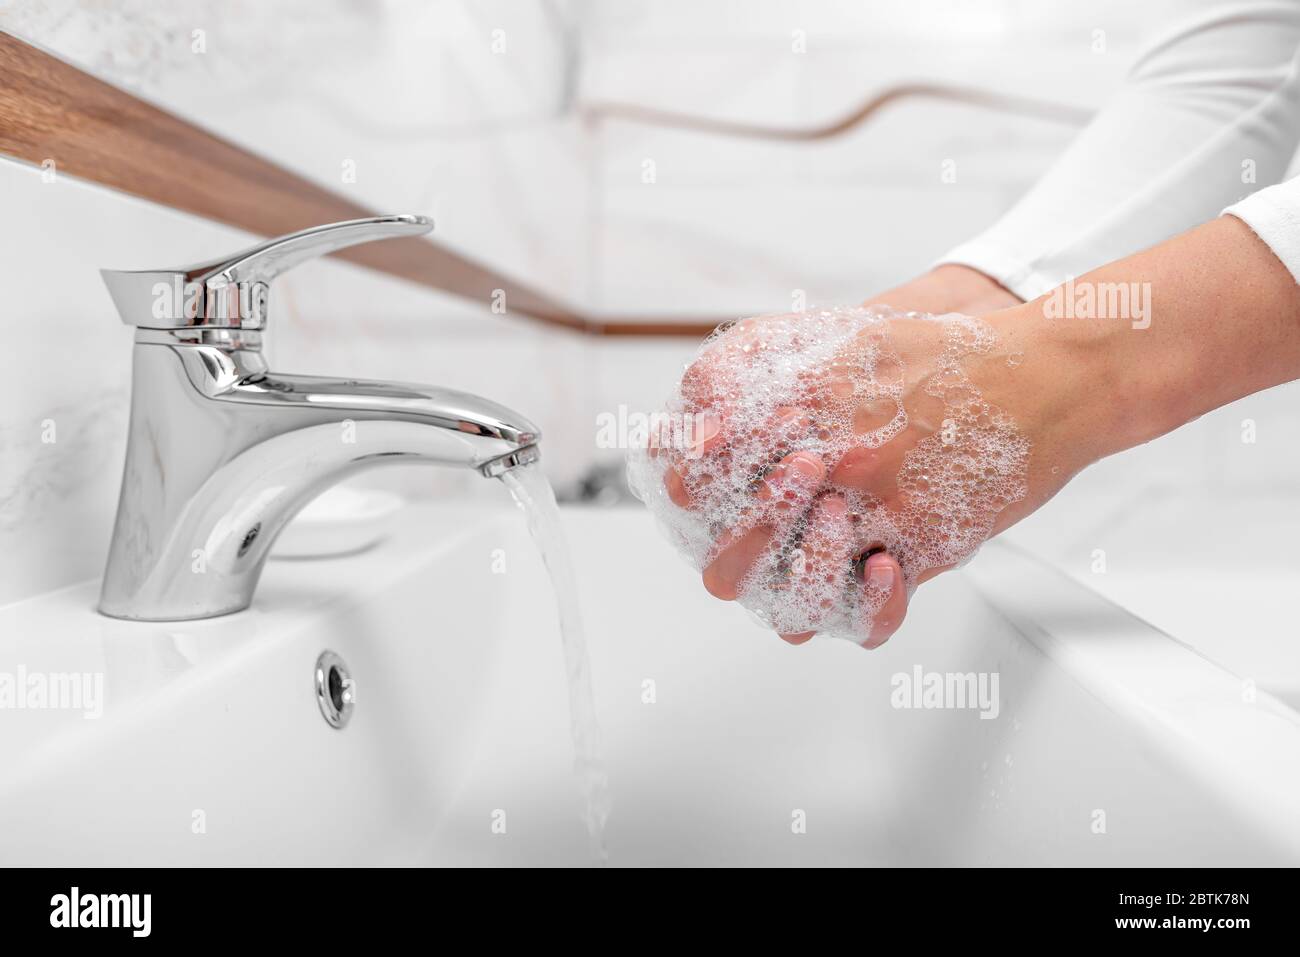 Someone washes hands with soap while standing in the bathroom. Stock Photo